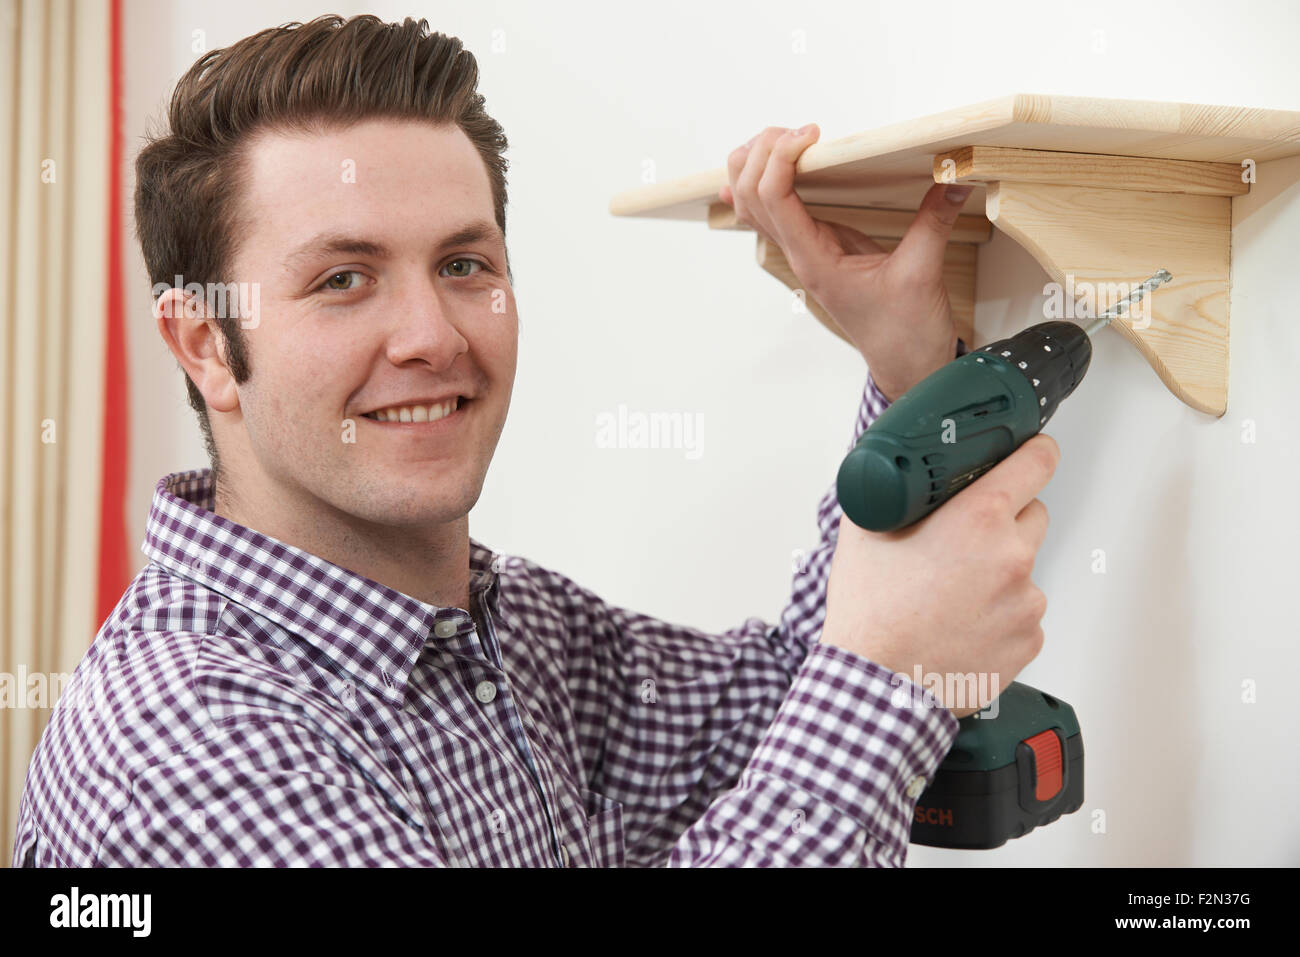 Man Putting Up Wooden Shelf At Home Using Electric Drill Stock Photo